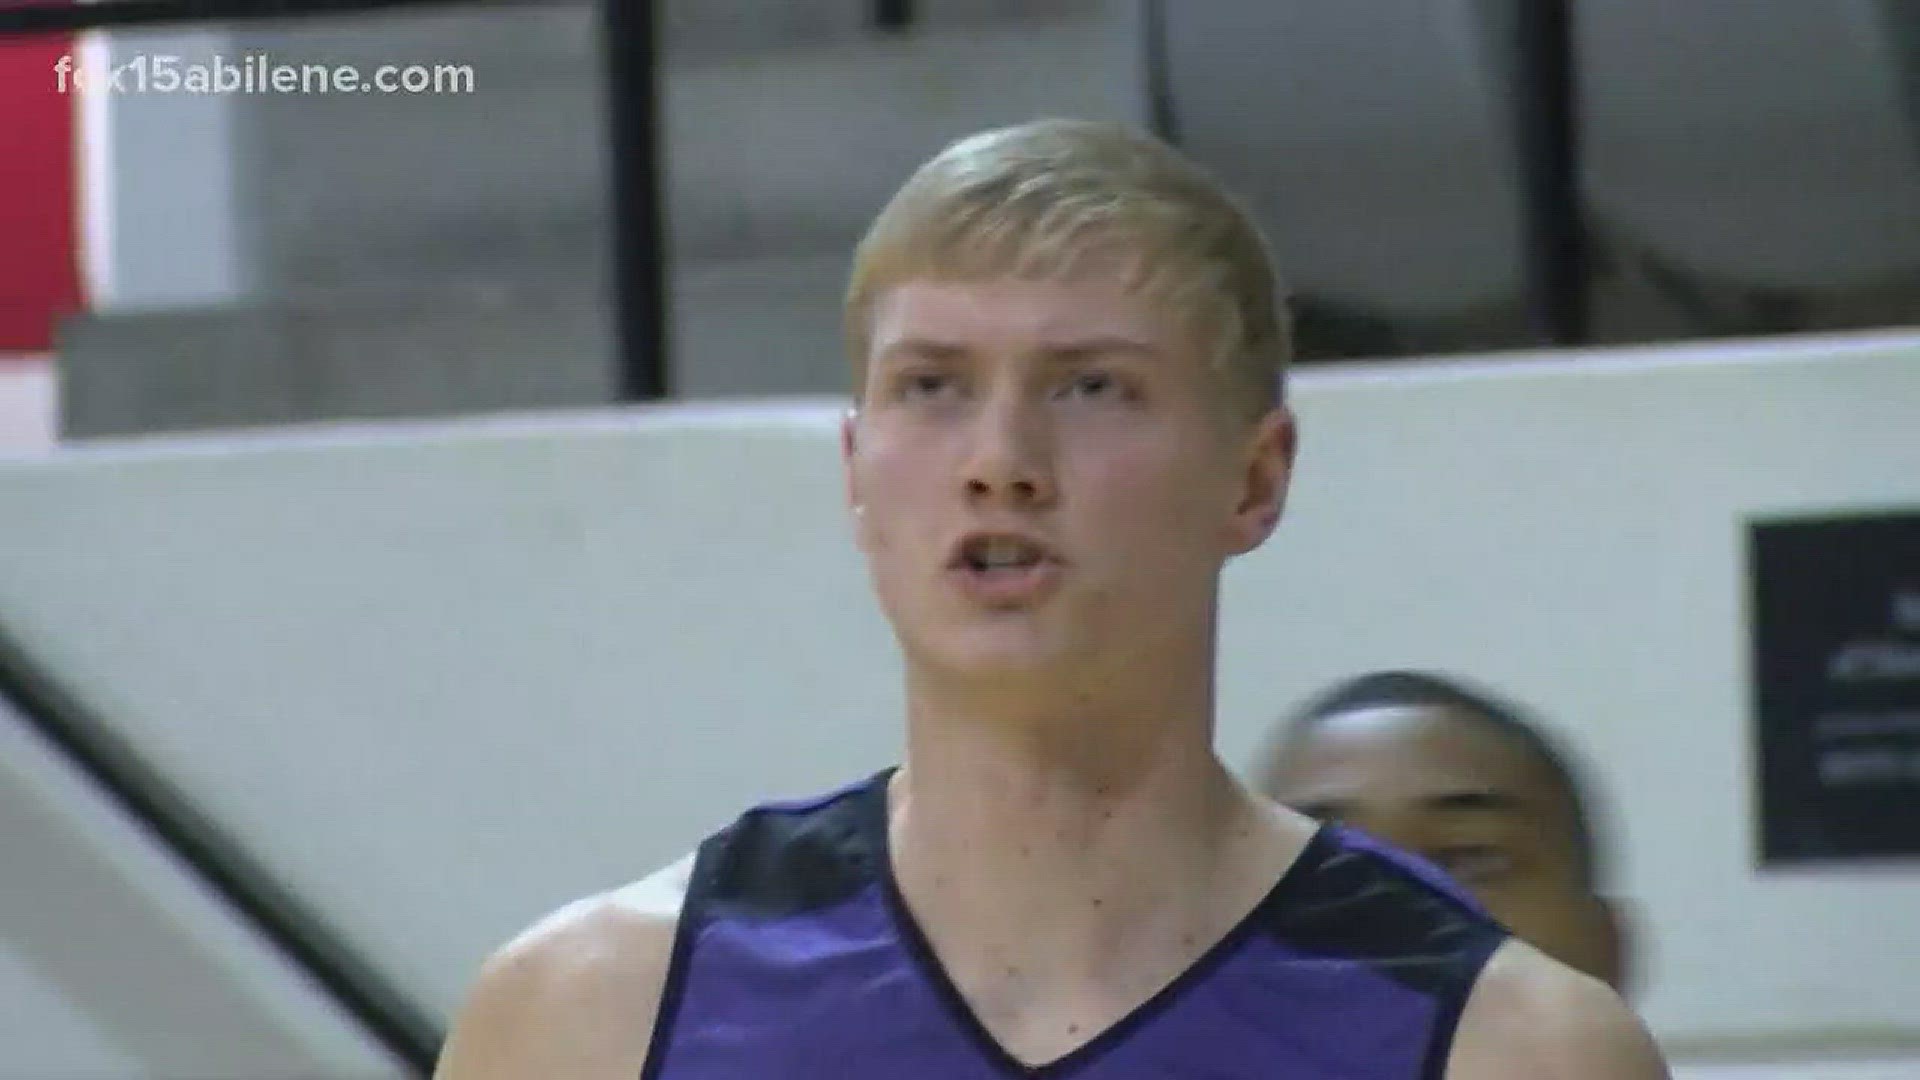 A few years ago, Kolton Kohl was a standout baller at San Angelo Central. Now he's working his way up at ACU. We caught up with him to learn some more about him off the court.